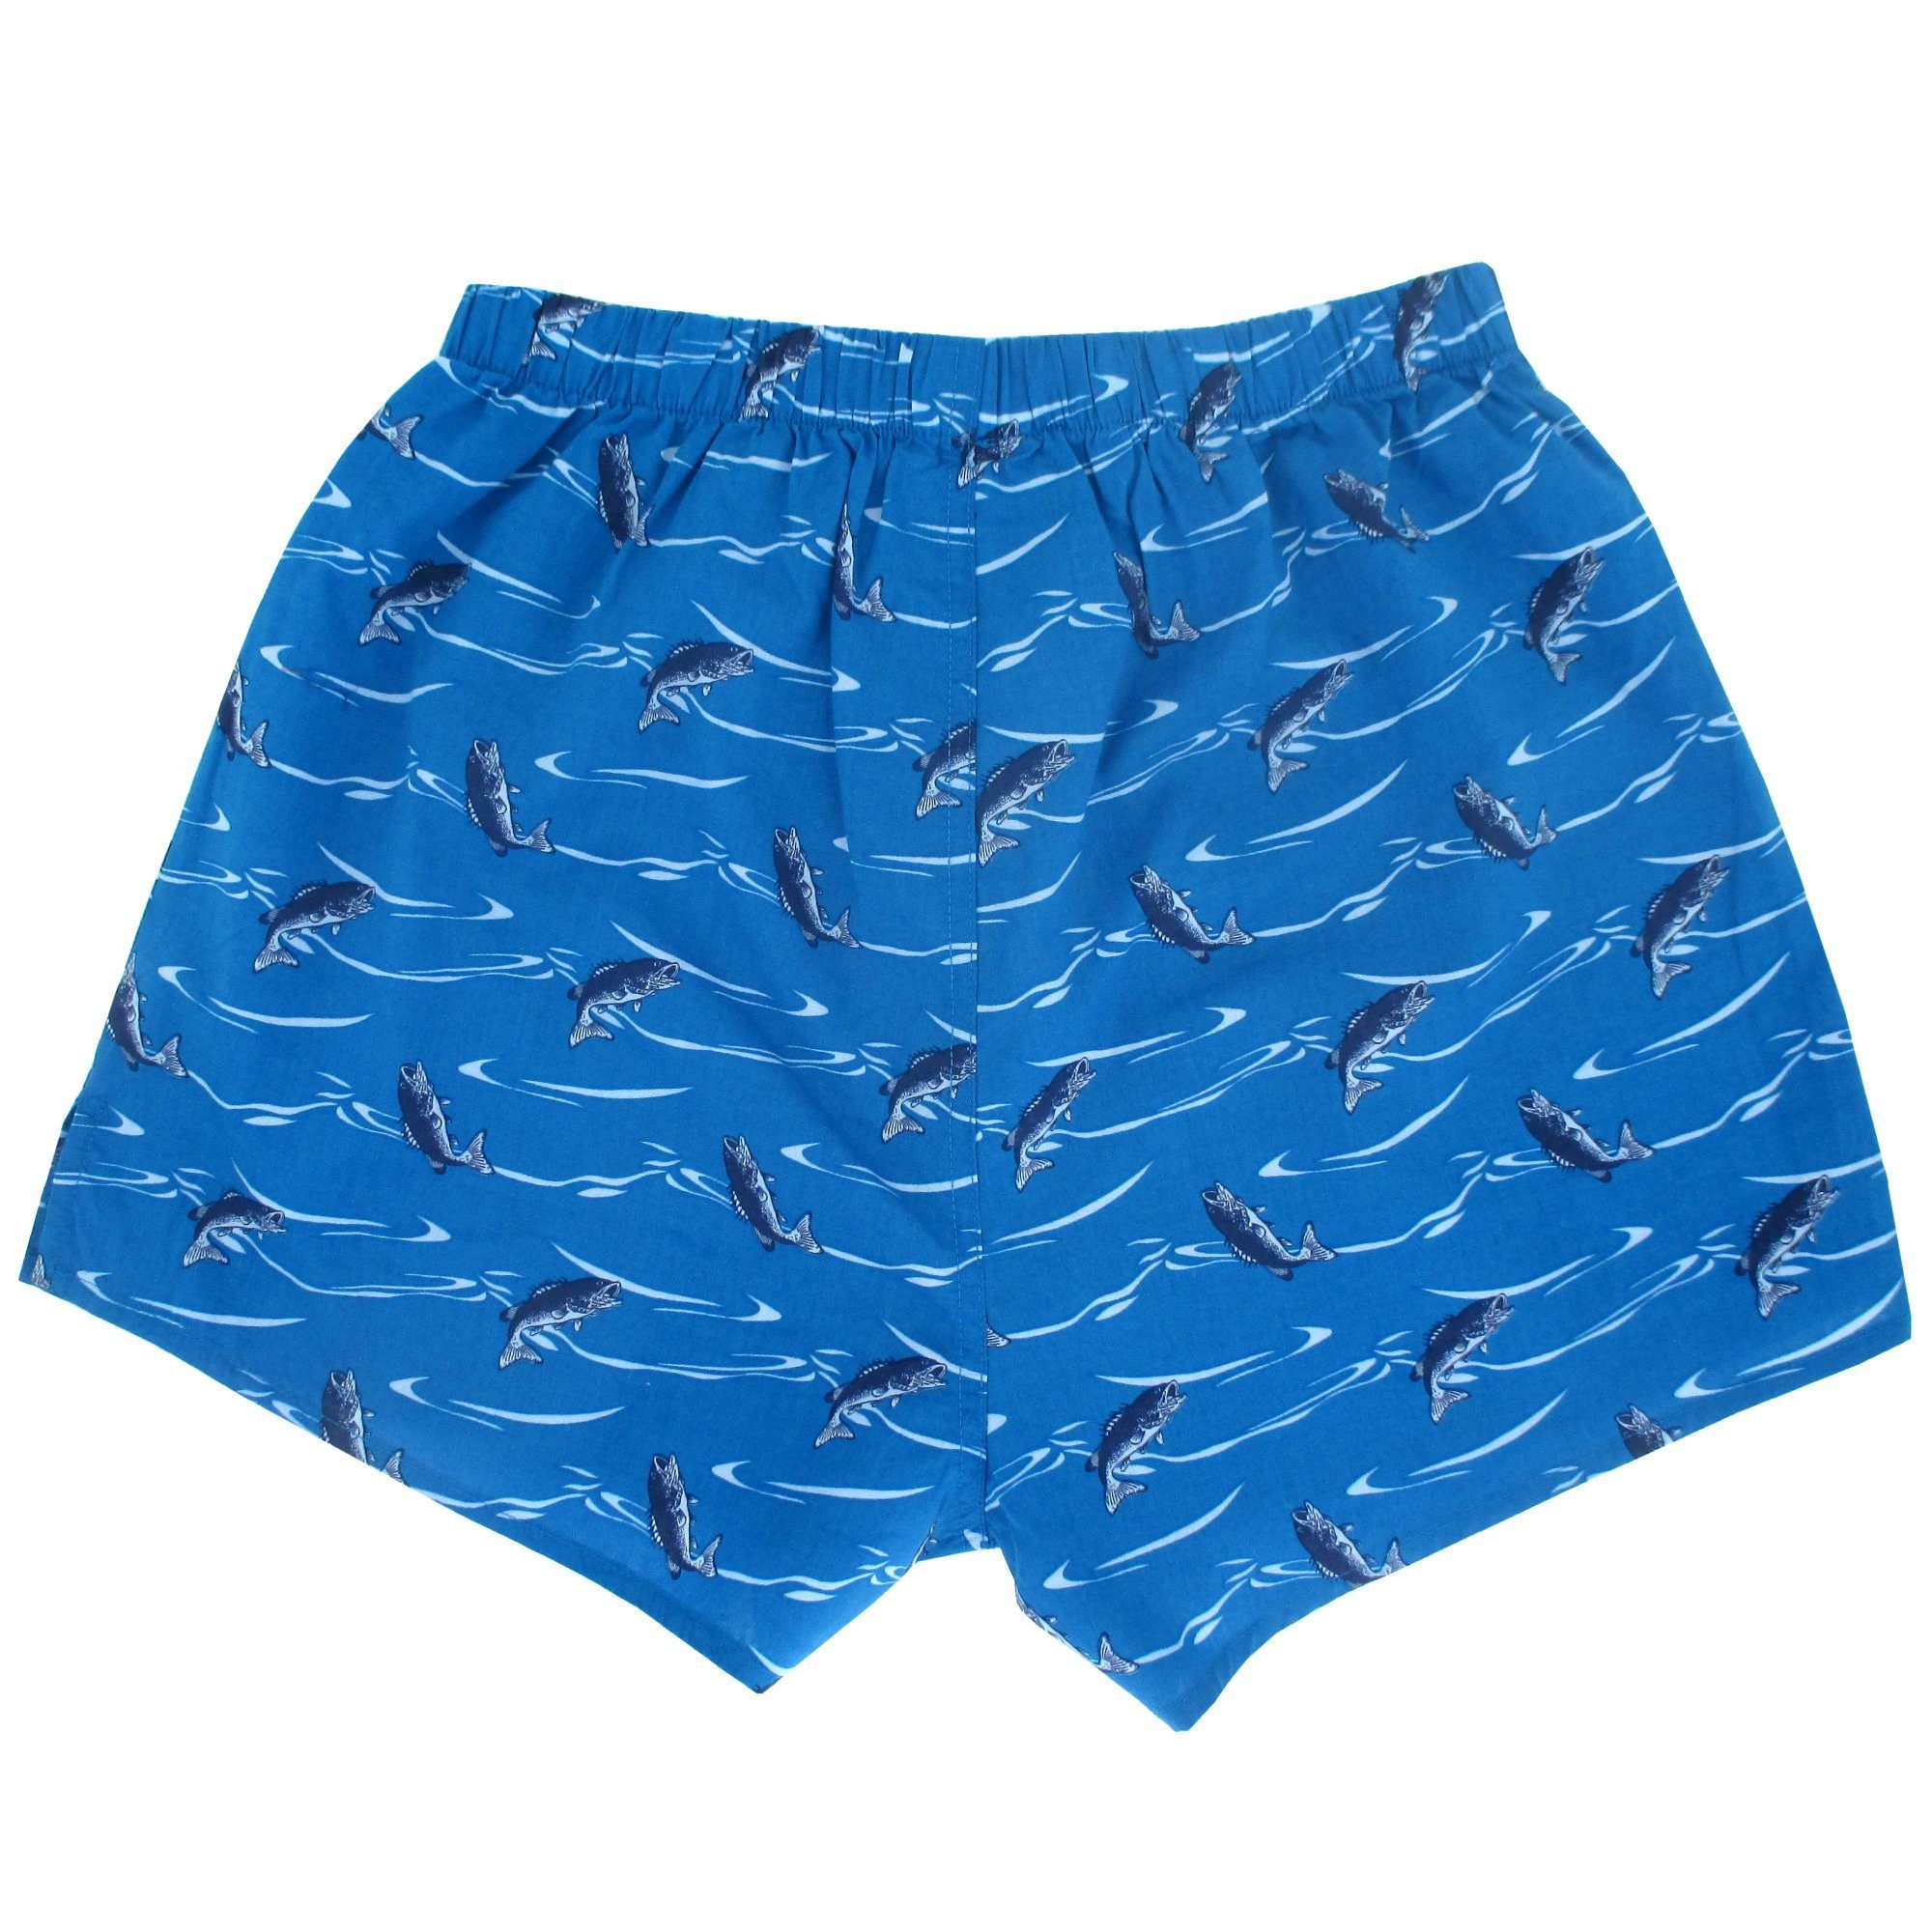 Men's Bright Blue Boxer Shorts with Fishes All Over Print